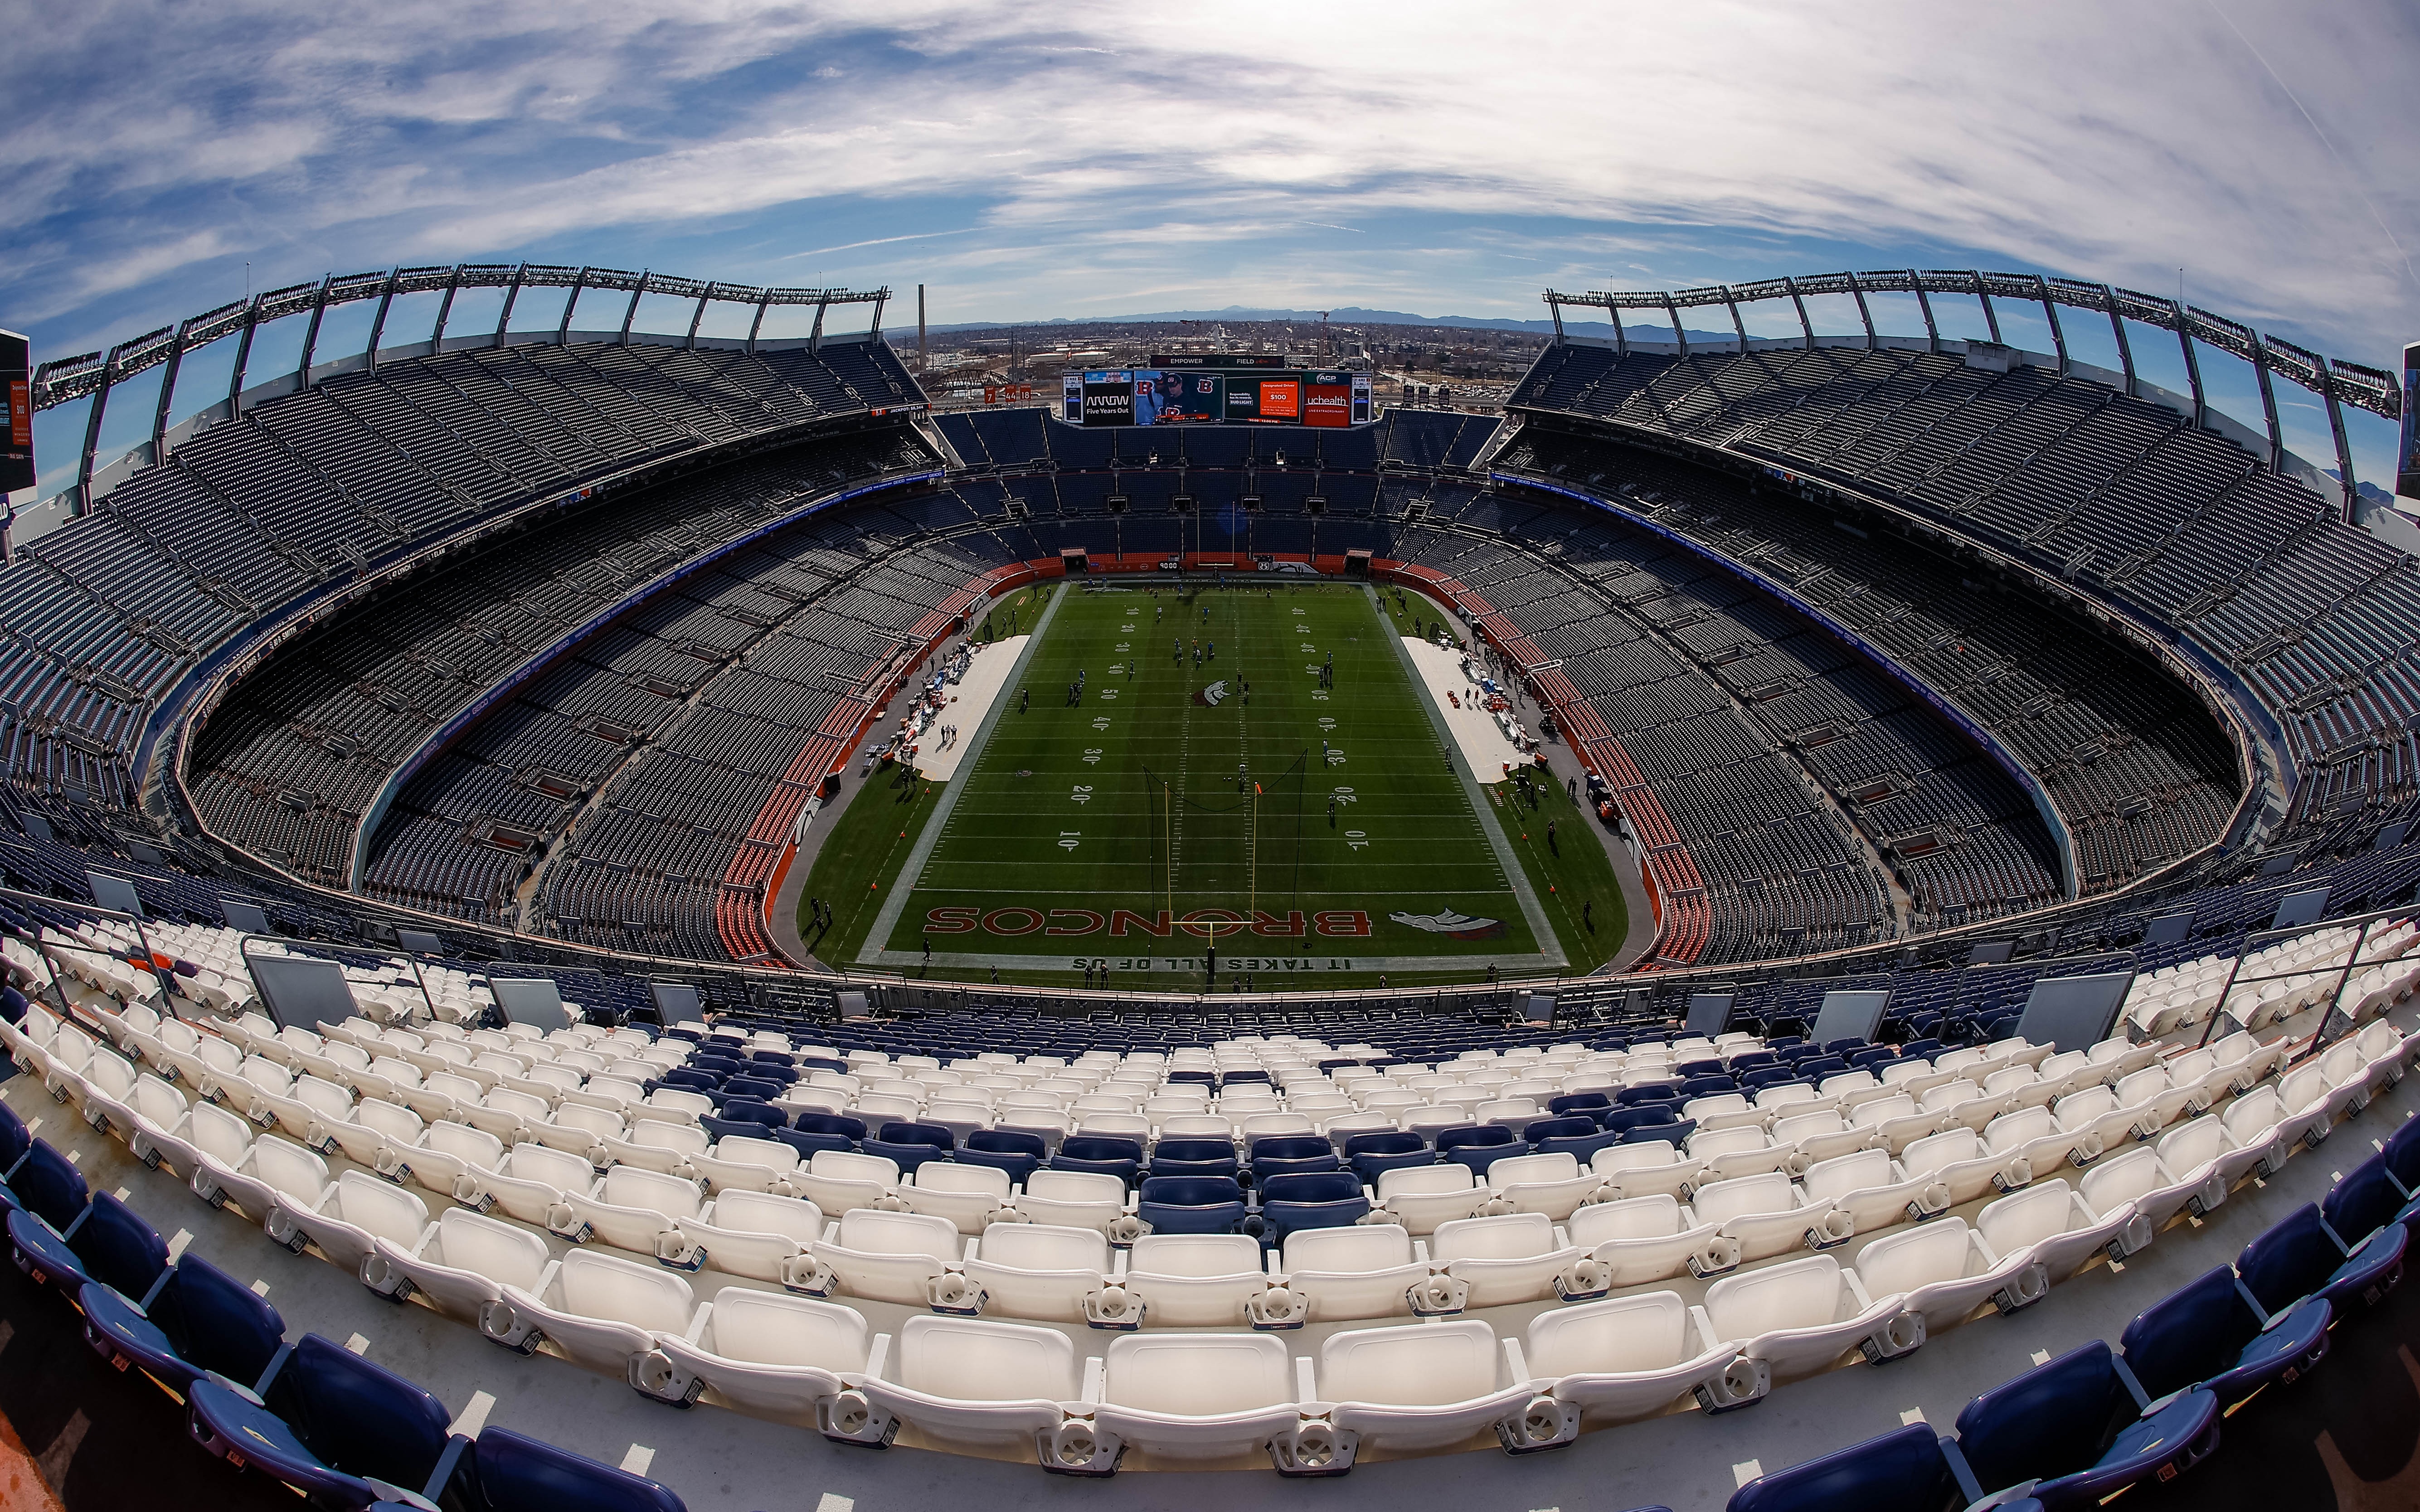 Empower Field at Mile High Stadium. Credit: Isaiah J. Downing, USA TODAY Sports.